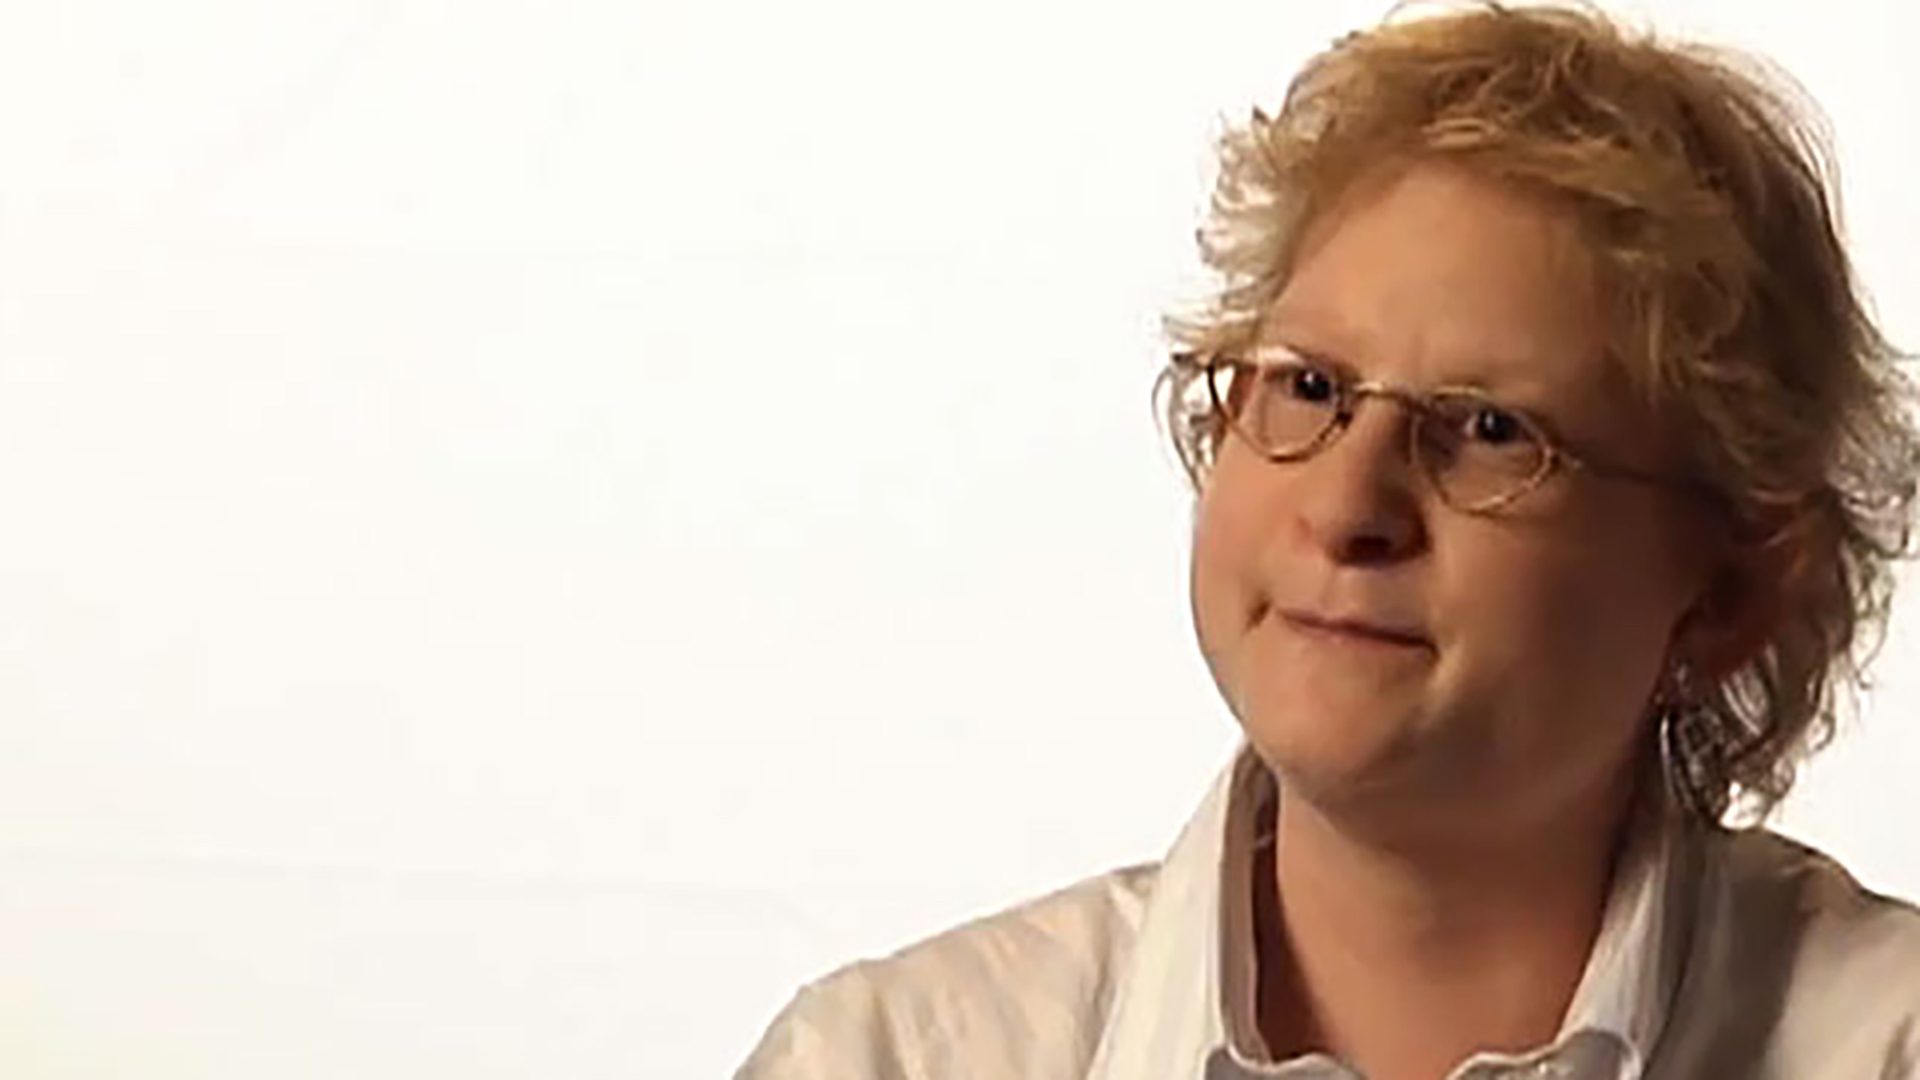 An adult woman with curly blonde hair and glasses wearing a white collared shirt is interviewed against a white background.